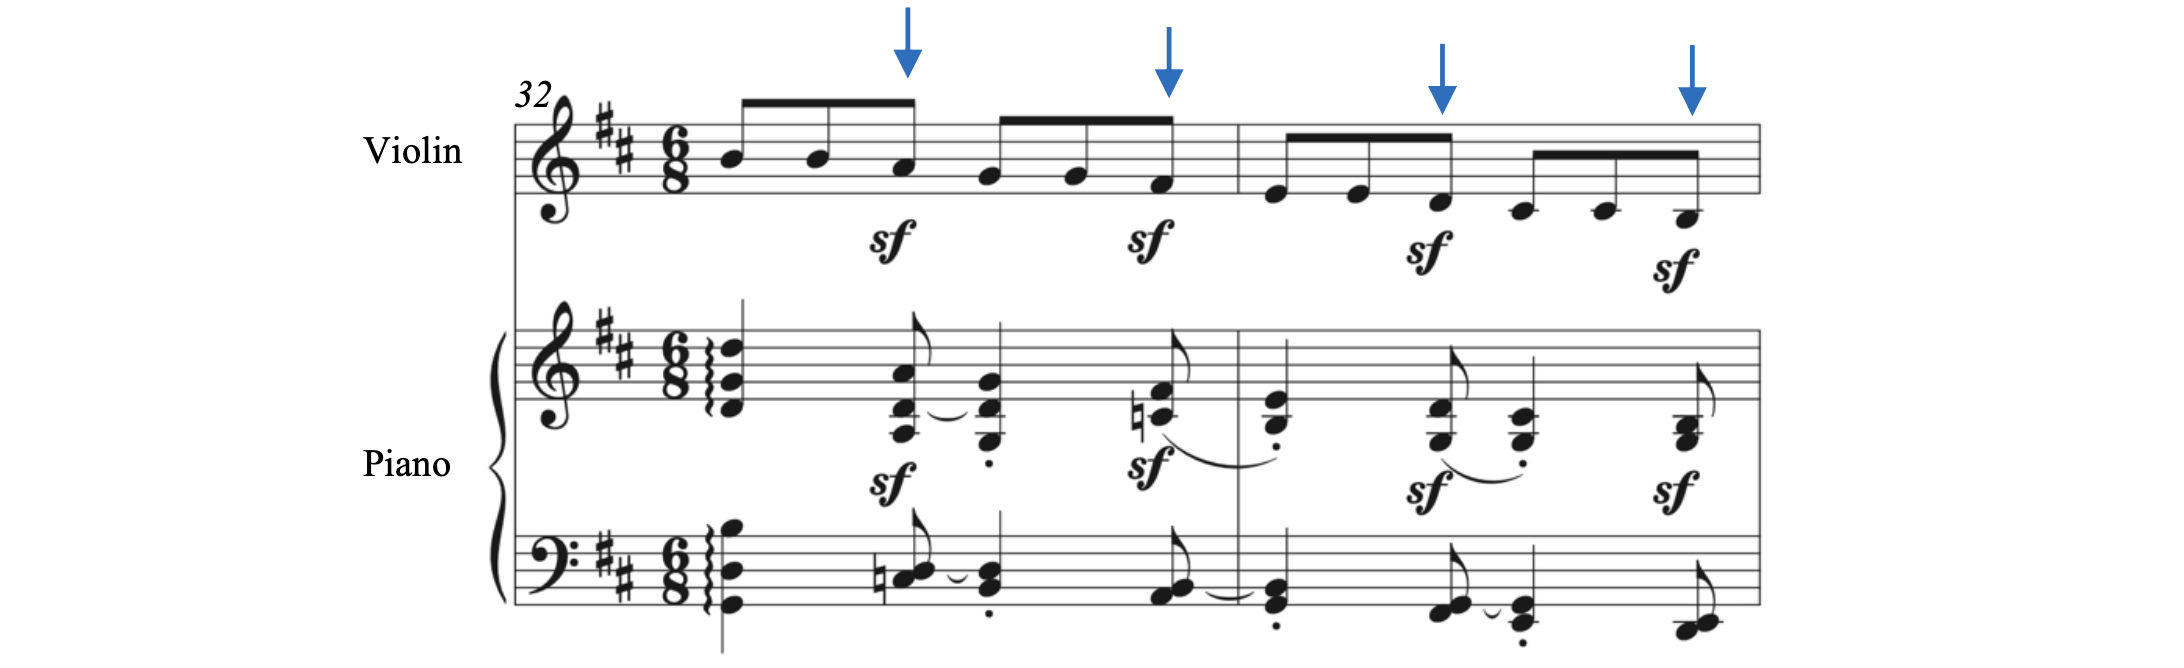 Offbeat syncopations in Röntgen-Maier's Violin Sonata in B Minor, First Movement, Allegro are shown by asterisks, which occur on the third eighth note of each beat.